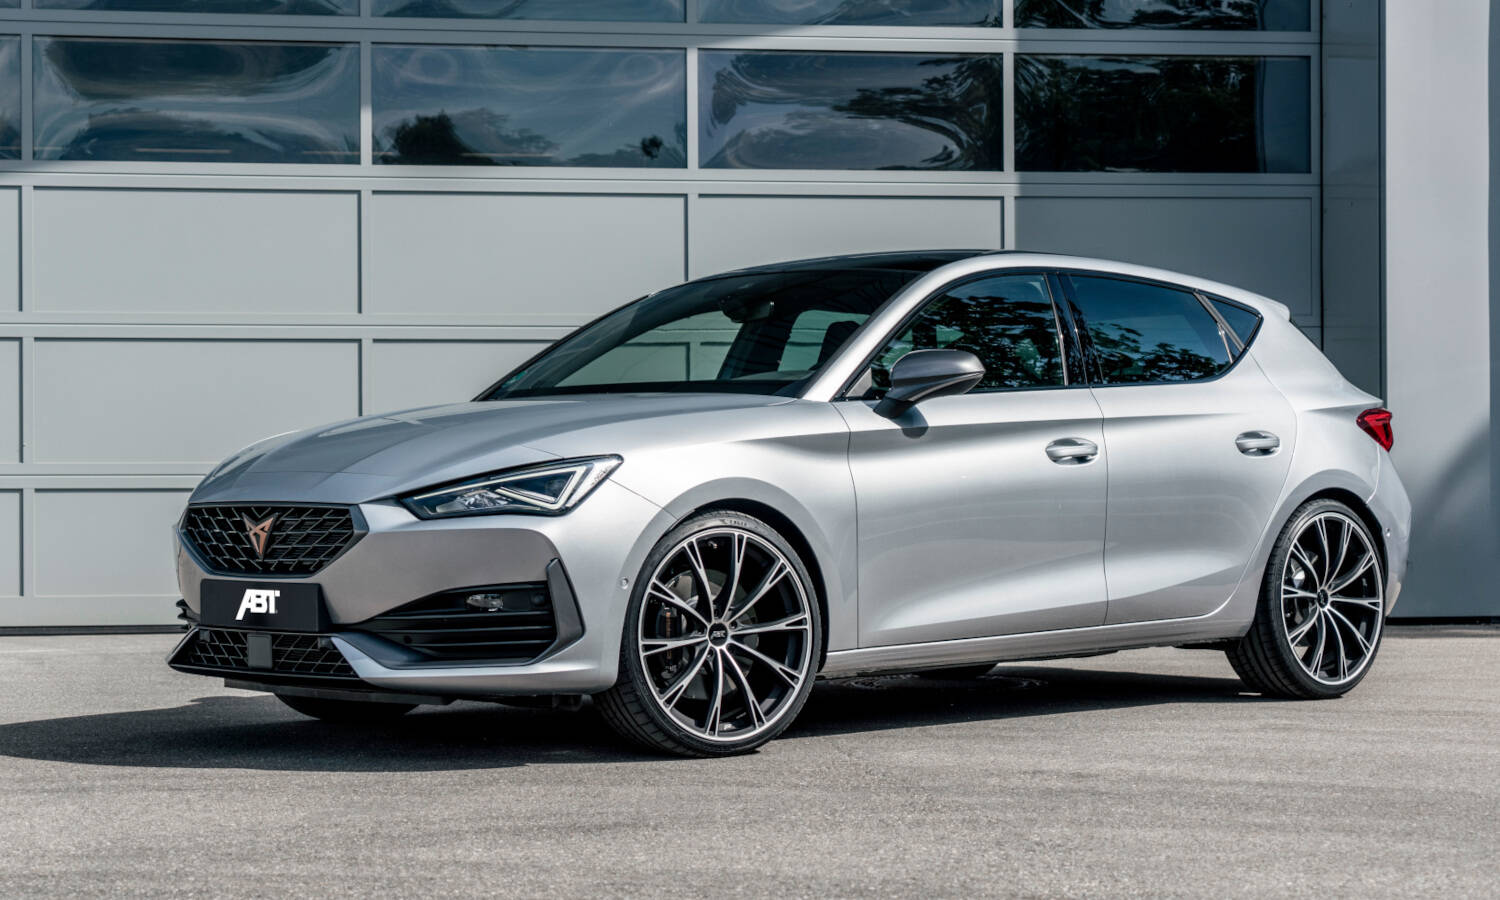 ABT Cupra Leon Goes Official With up to 365 HP, New Wheels and